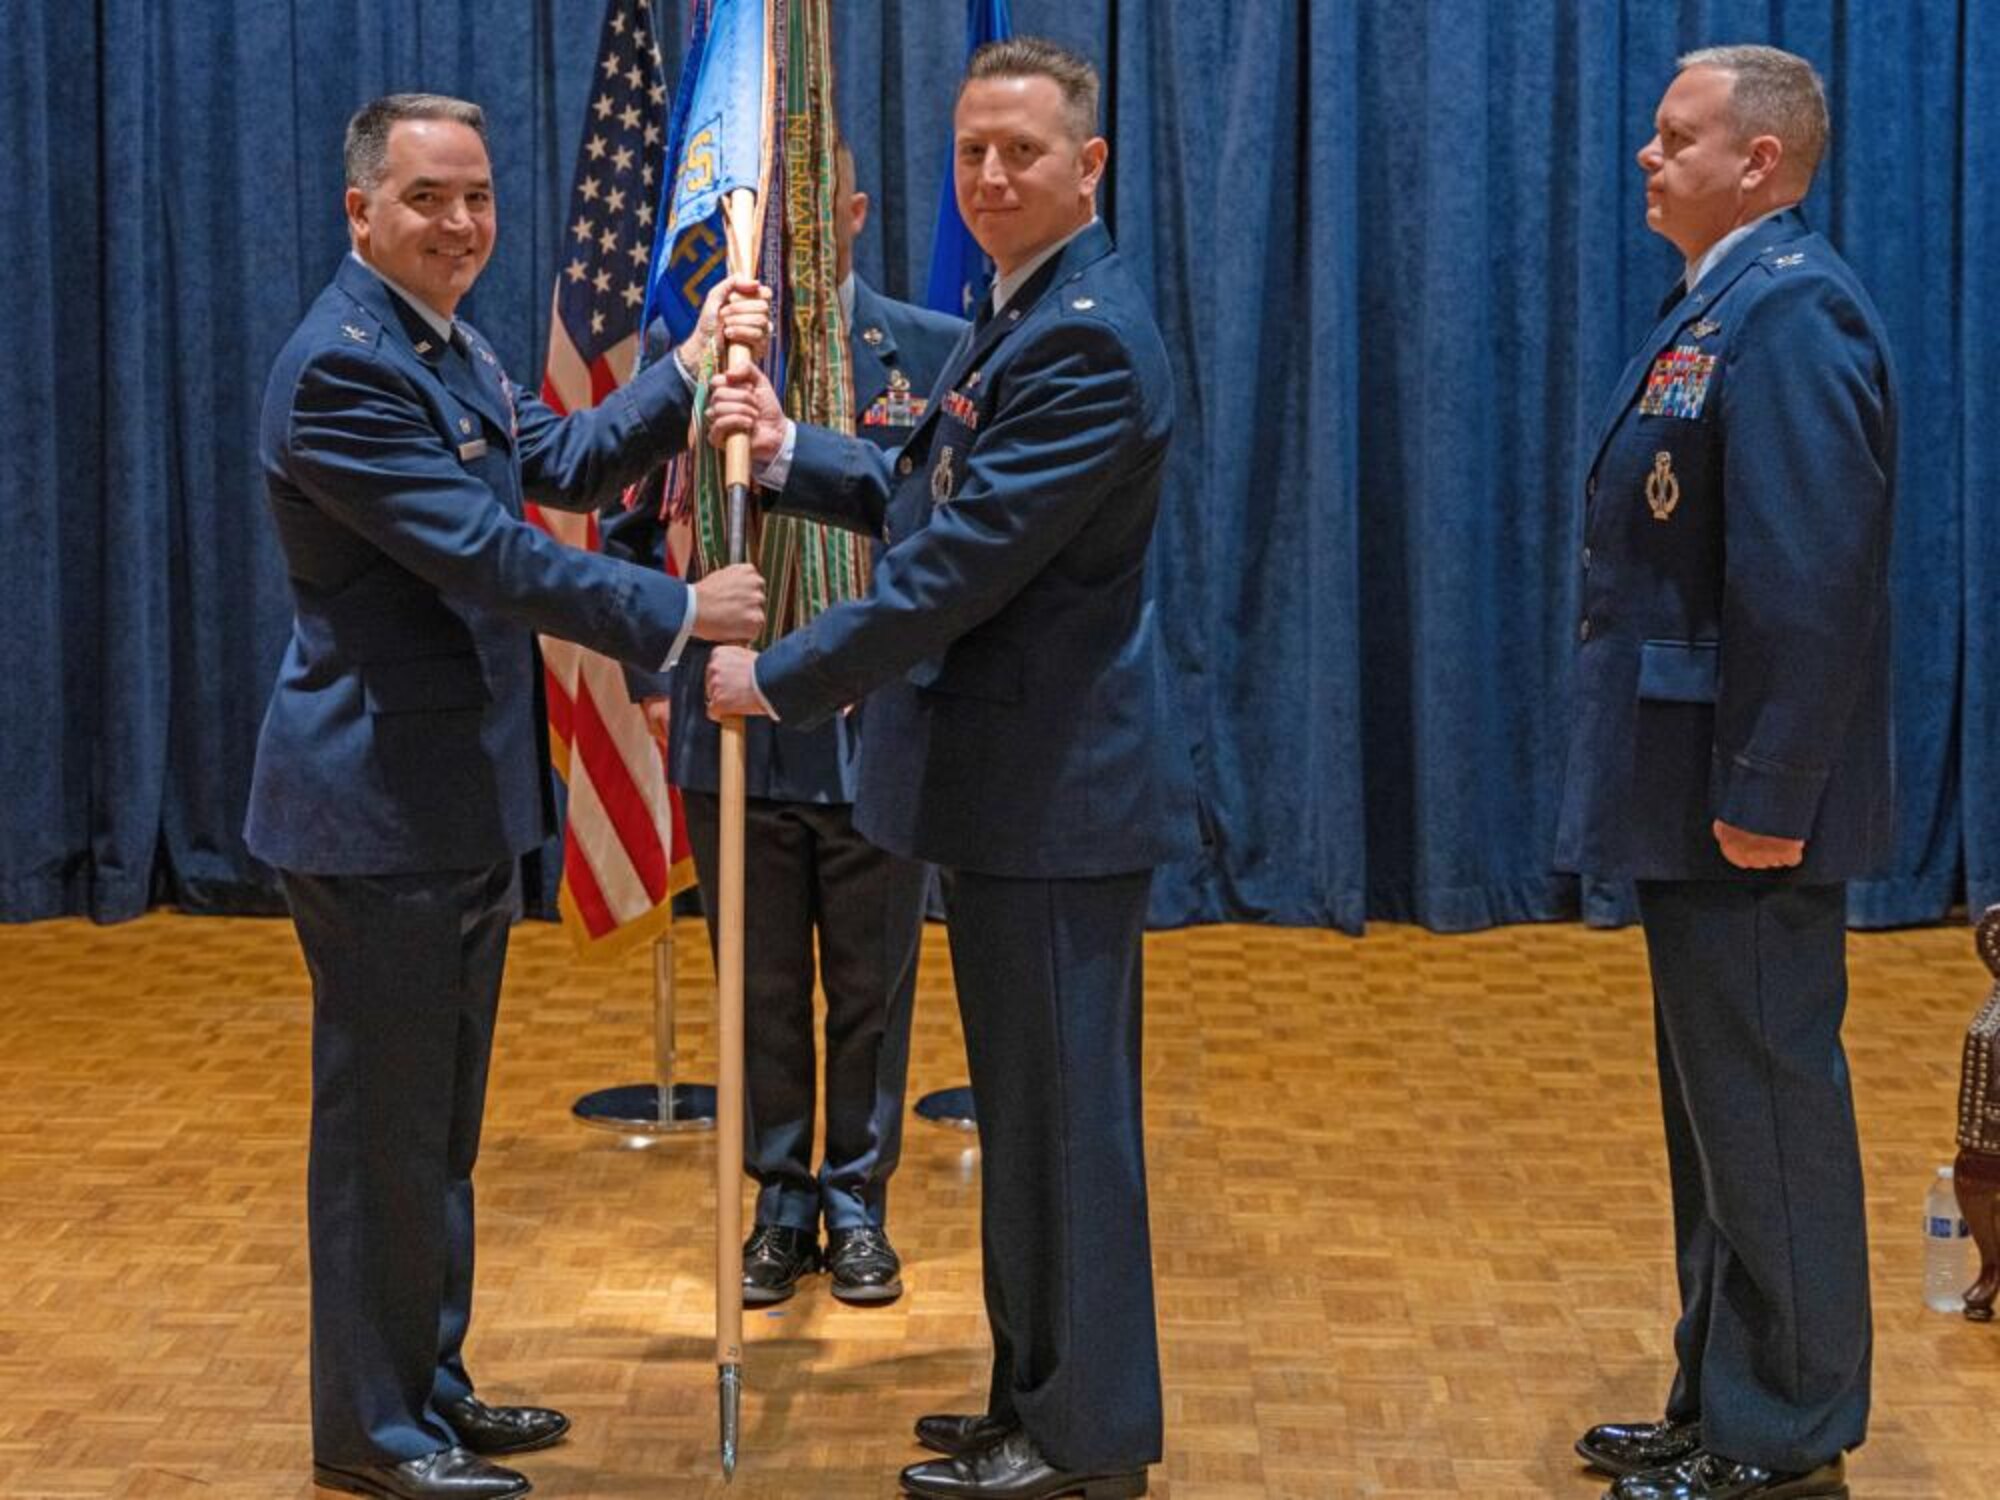 Col. Jason Vattioni (left), 377th Air Base Wing Commander, passes the 576th Flight Test Squadron guidon to Lt. Col. Tony Santino (center), incoming commander 576 FLTS, during a Change of Command ceremony November 8, 2022 at Vandenberg Space Force Base, California as Col. Christopher Cruise (right), outgoing commander 576 FLTS, looks on. (Photo by Guy McCutcheon, 576 FLTS)